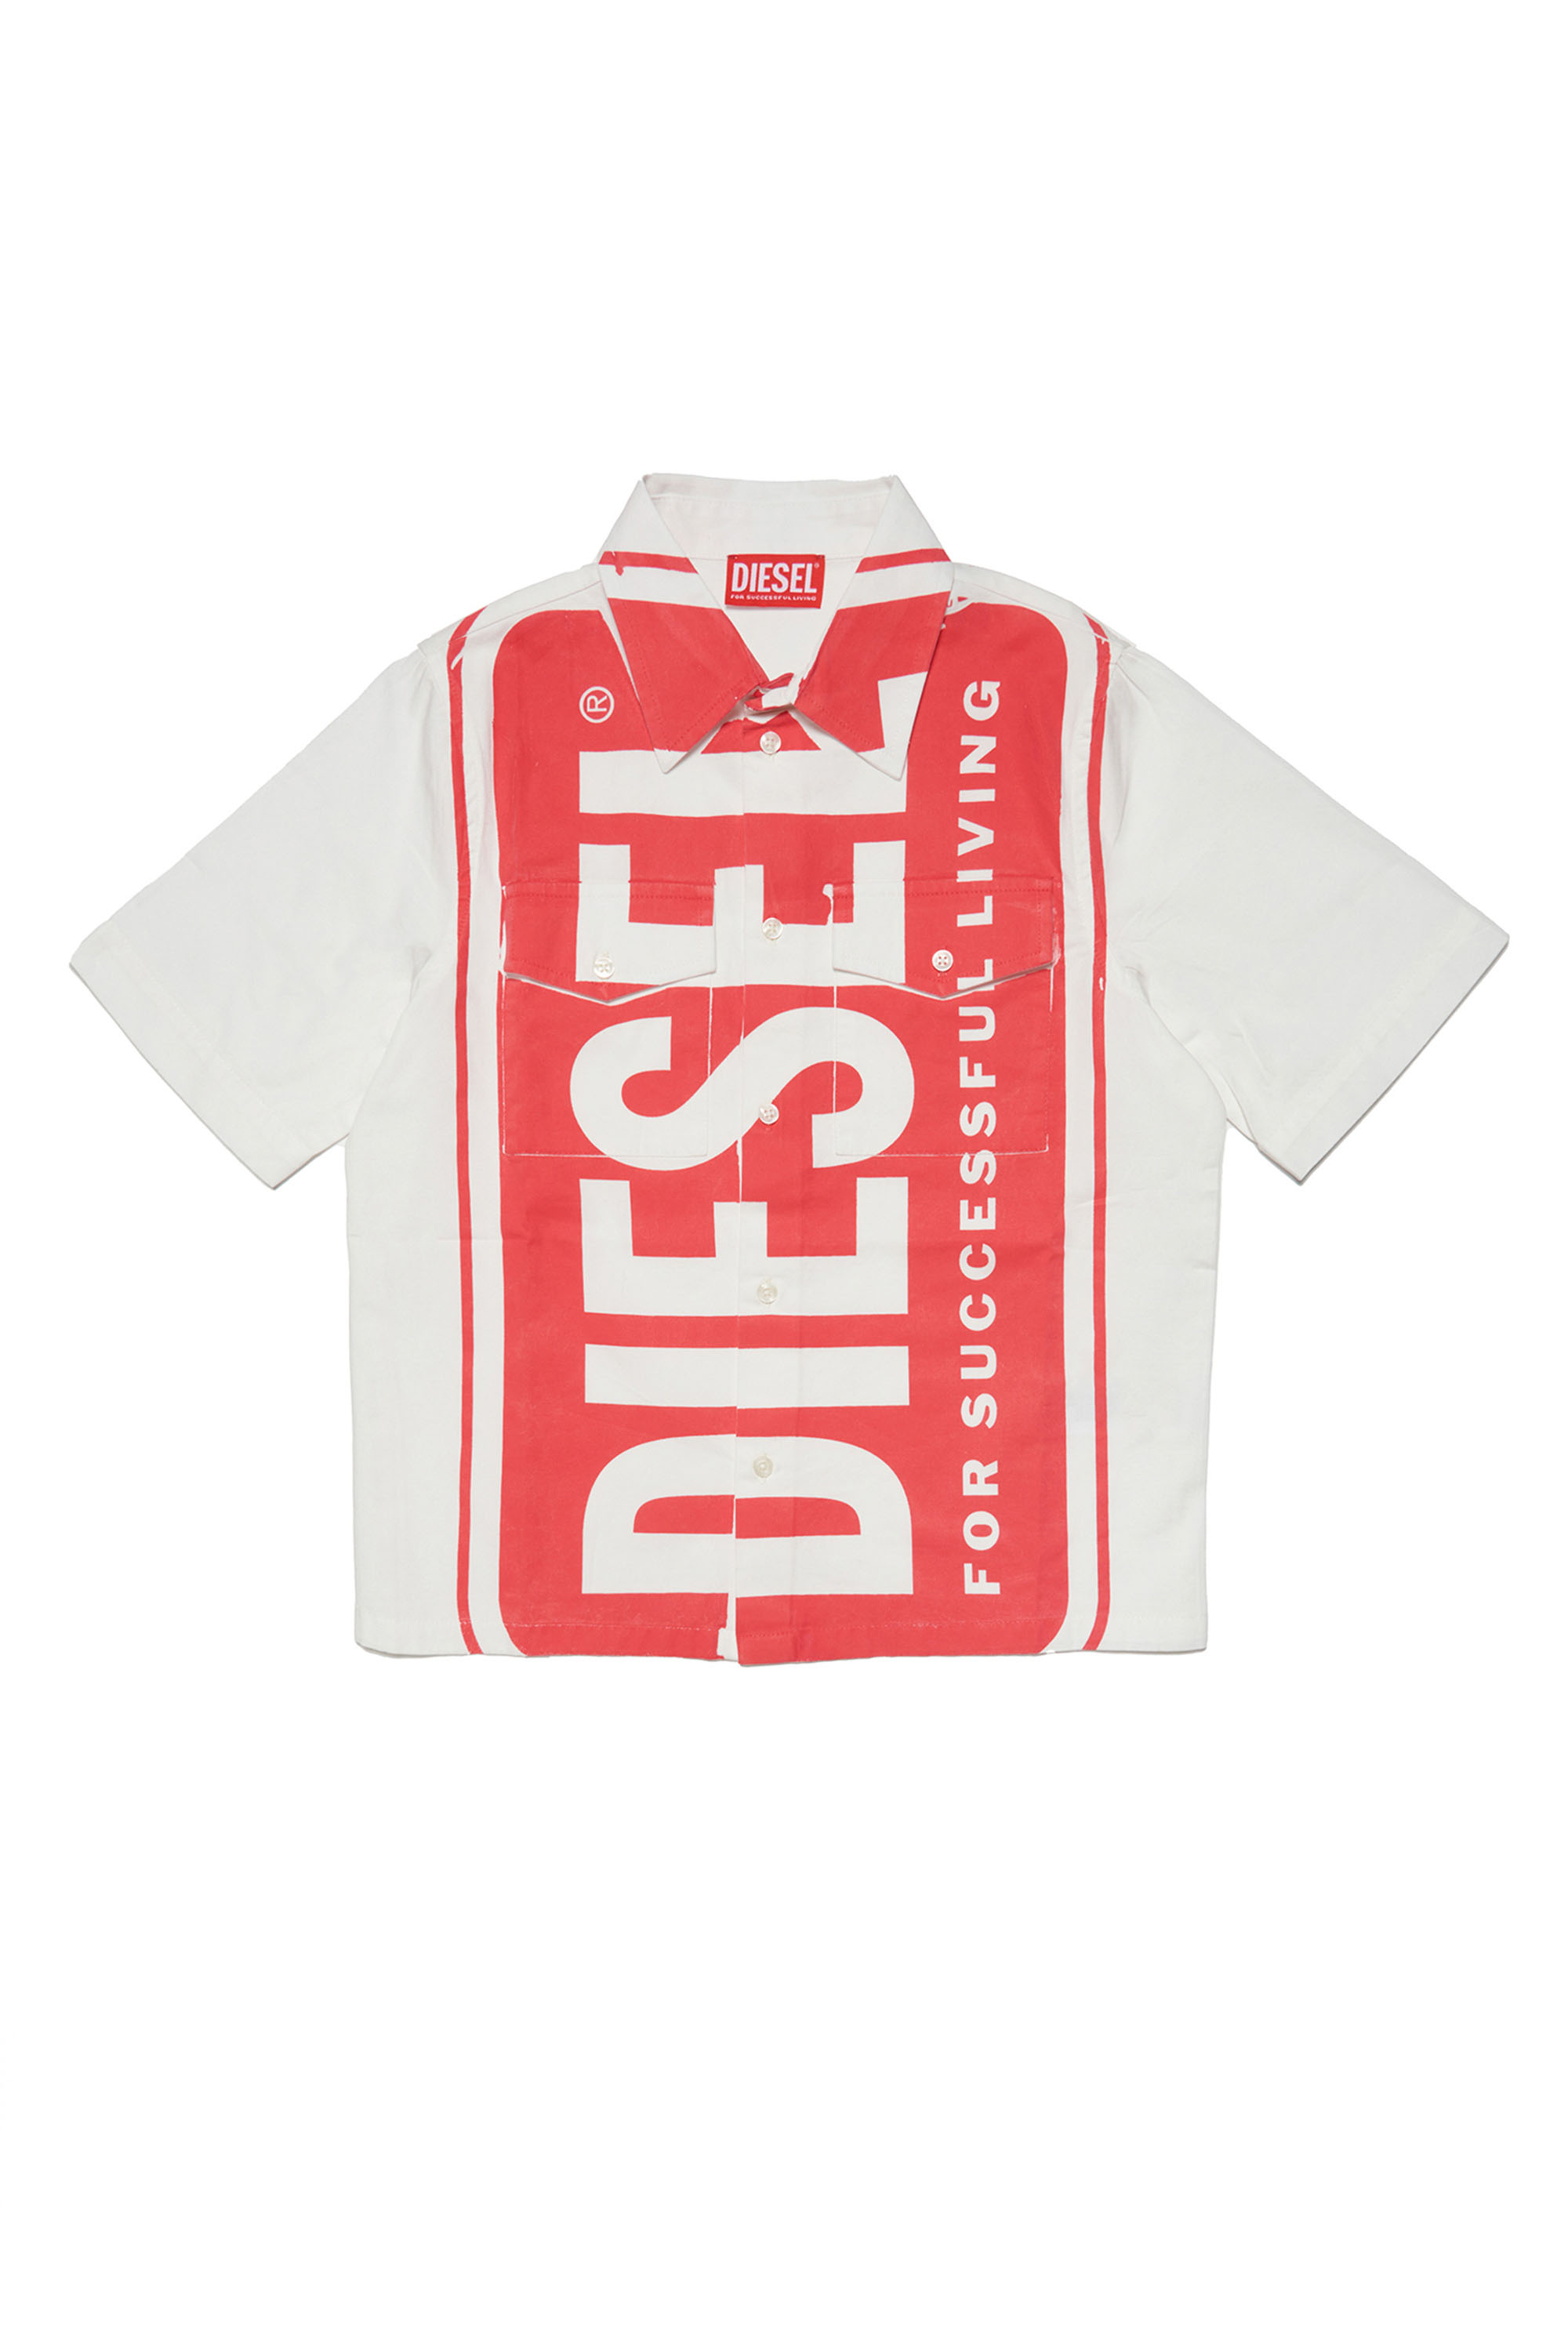 Diesel - CRISS, Bianco/Rosso - Image 1